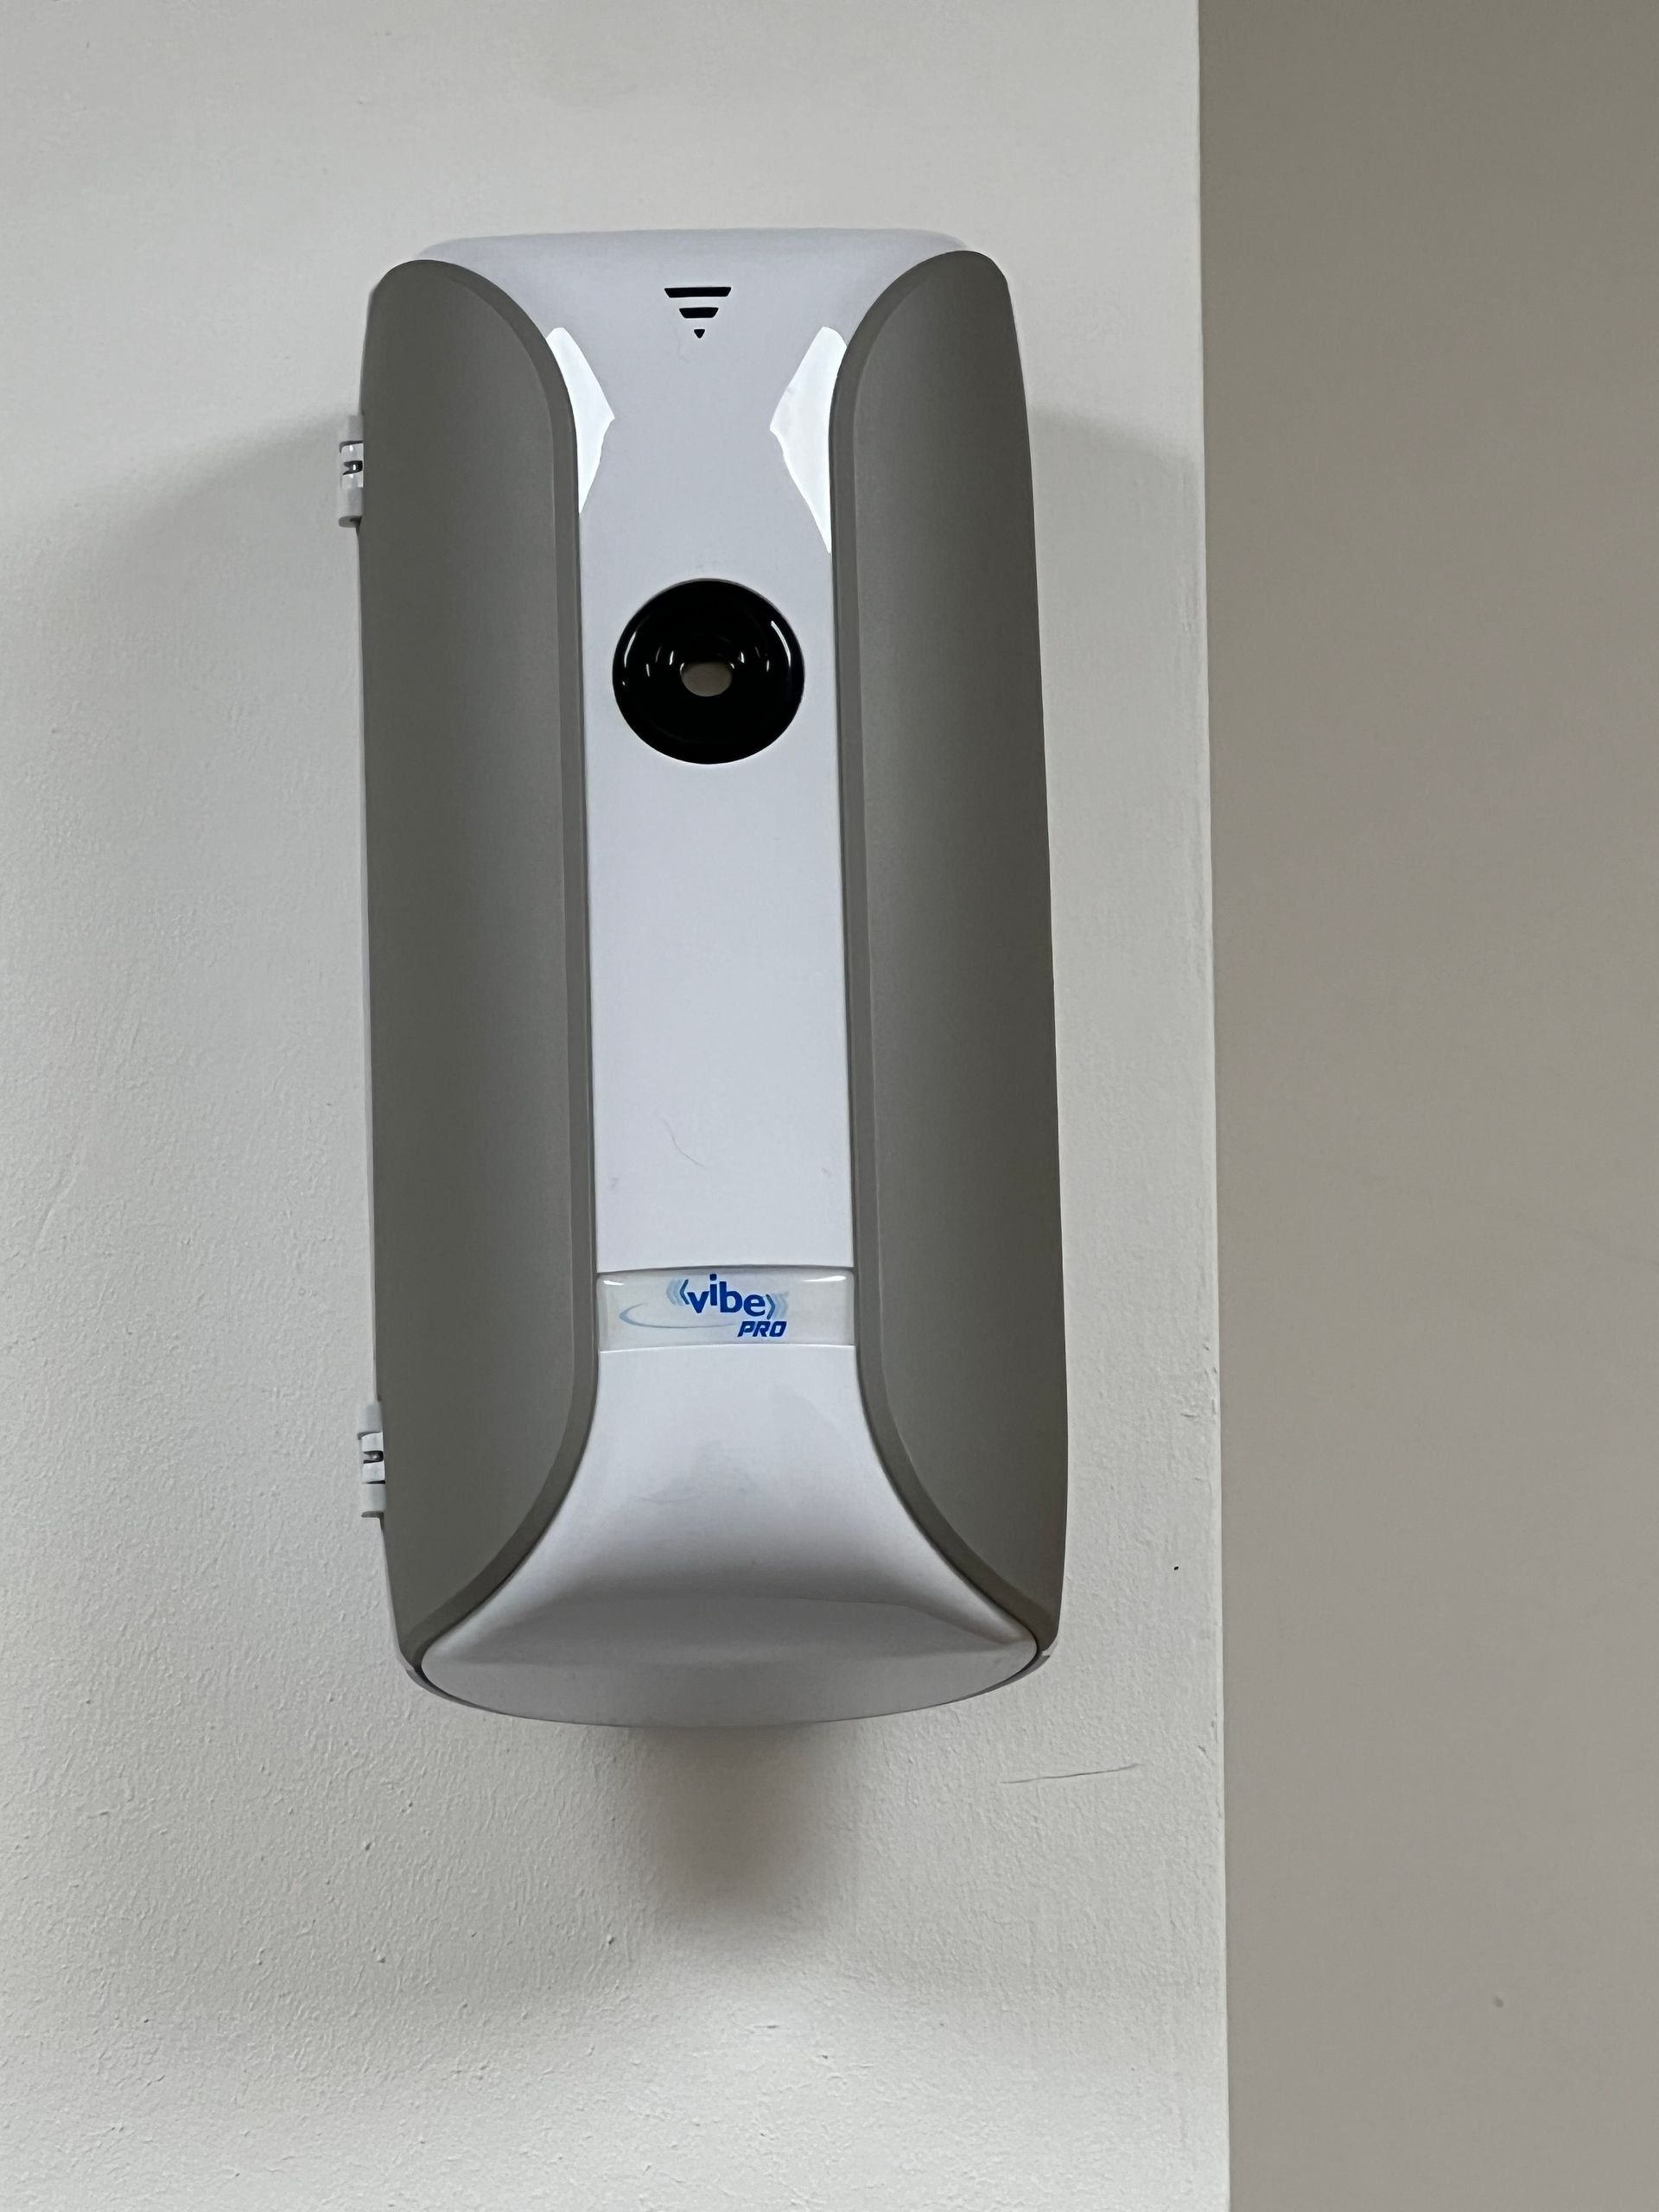 A picture of a very modern sleek well designed air freshener showing the need to connect services.